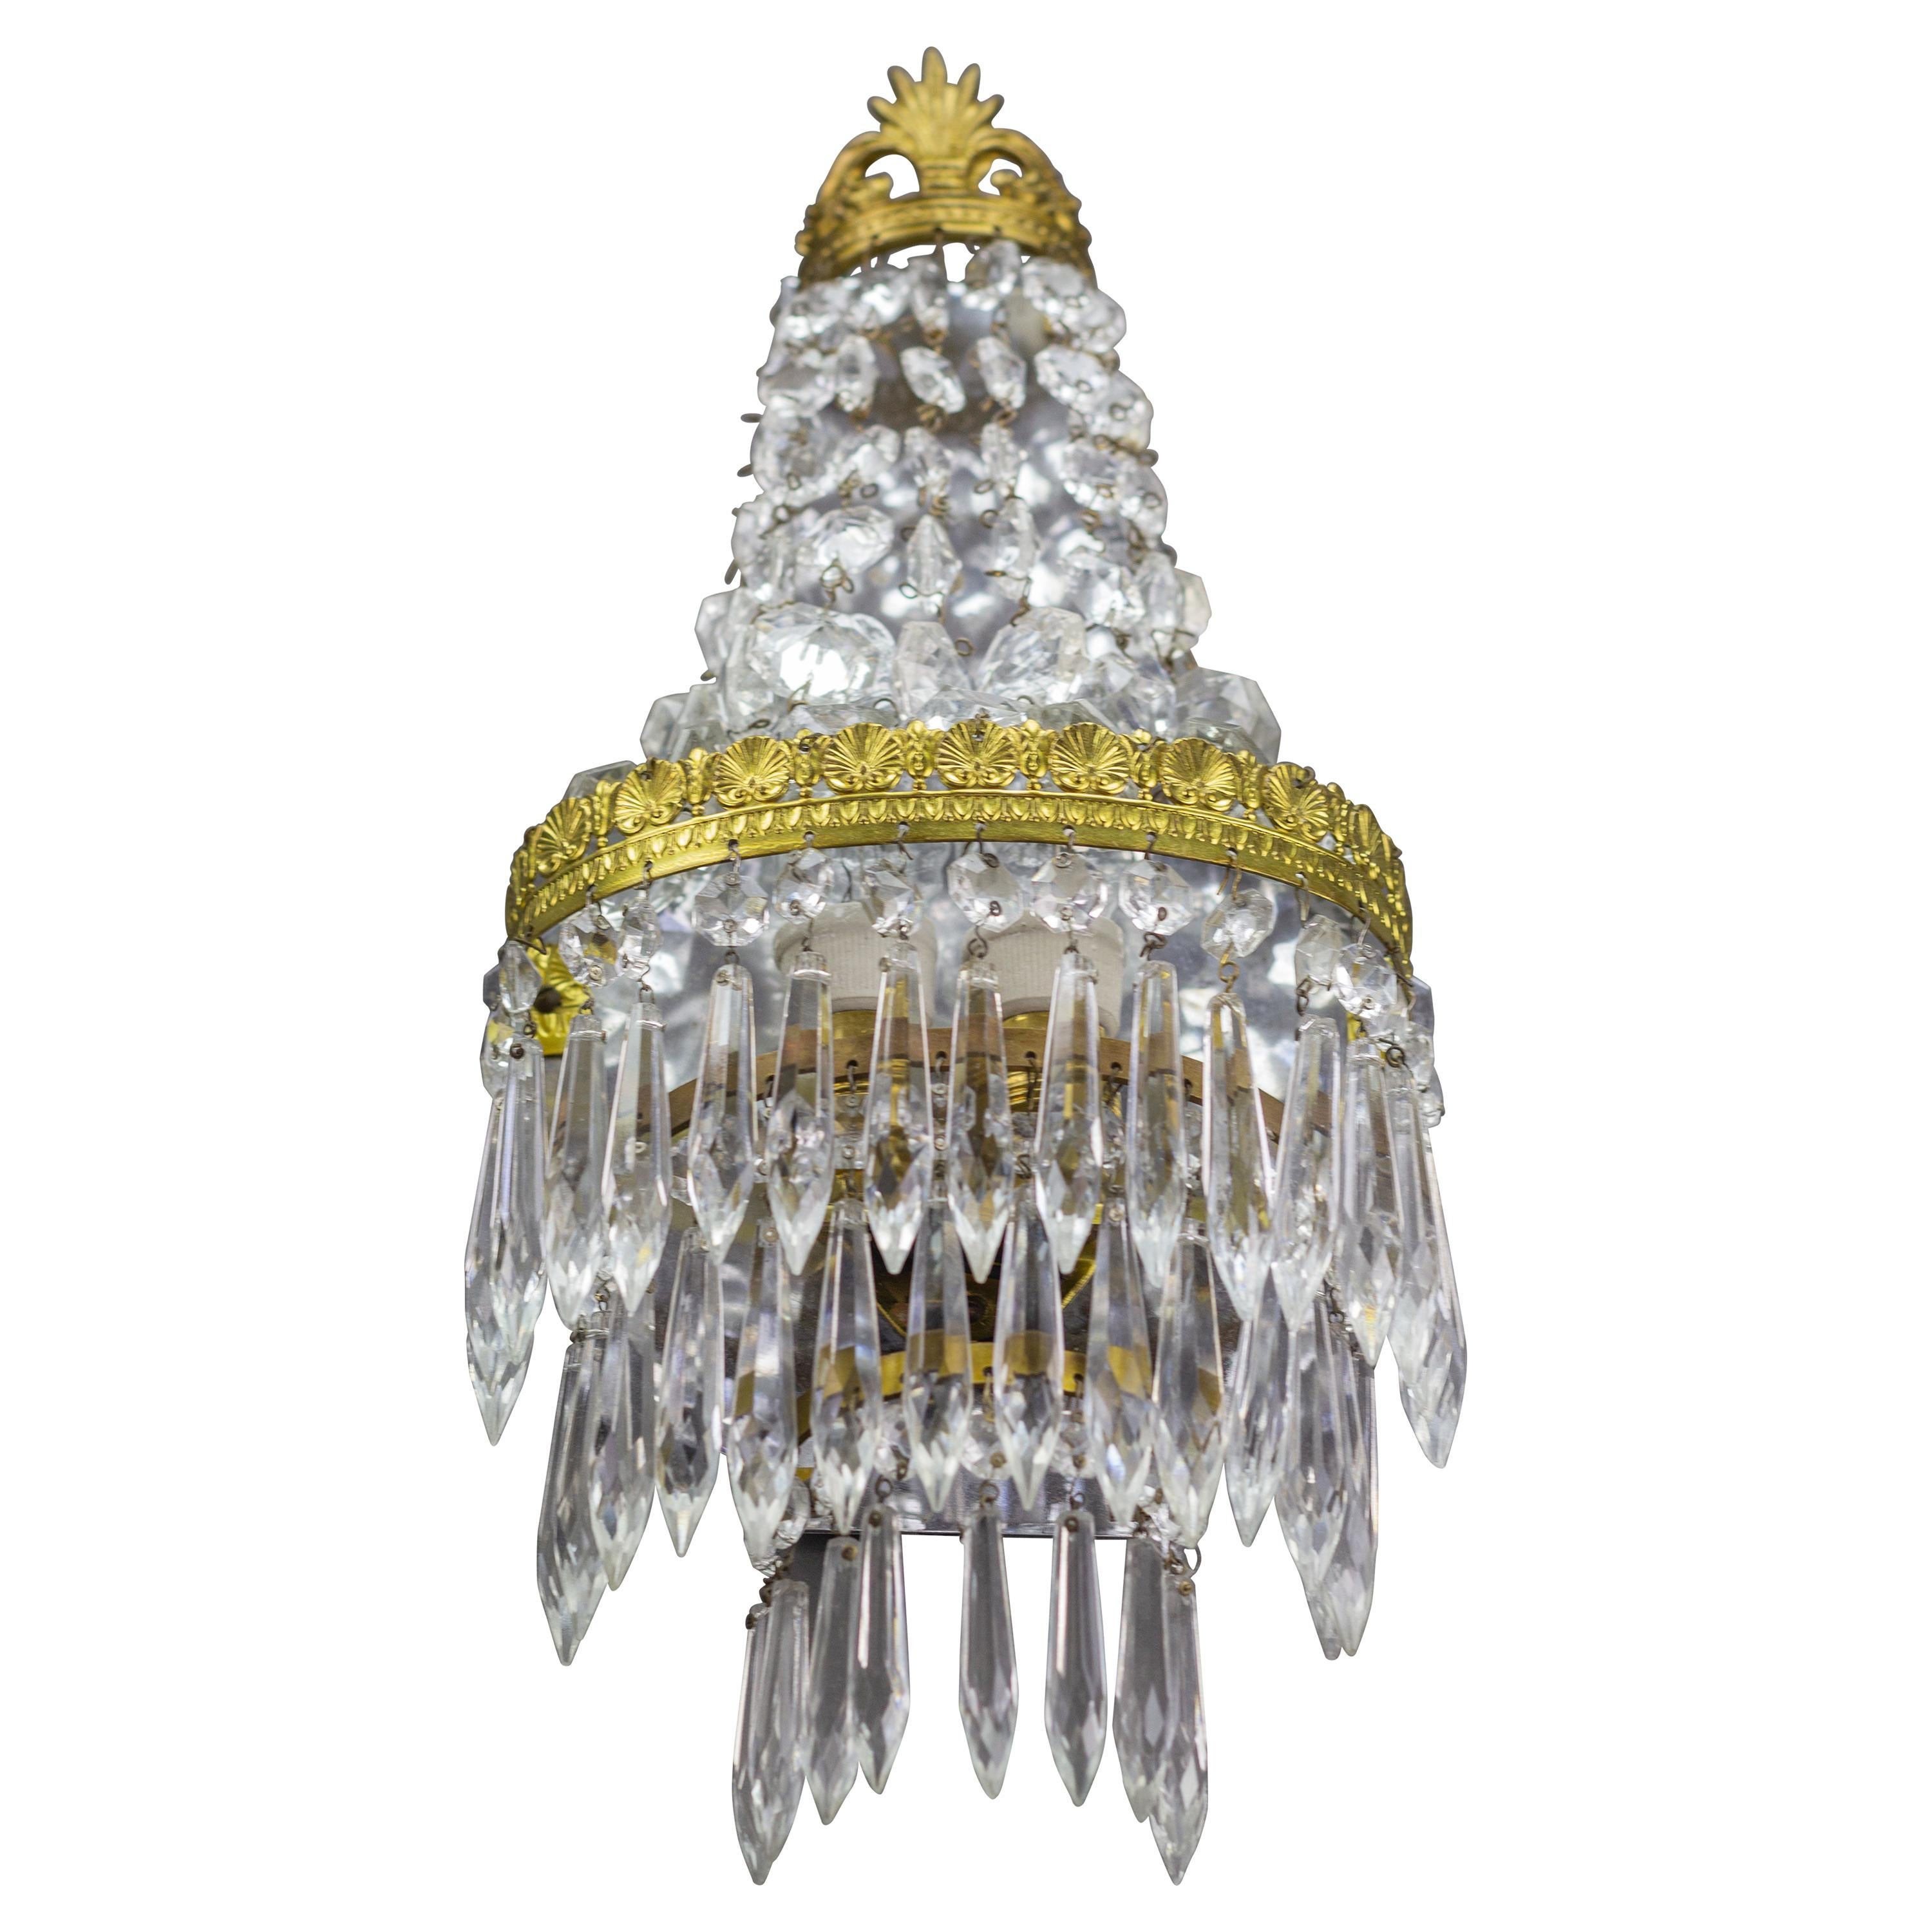 French Empire Style Crystal and Brass Sconce Wall Light, 1930s For Sale